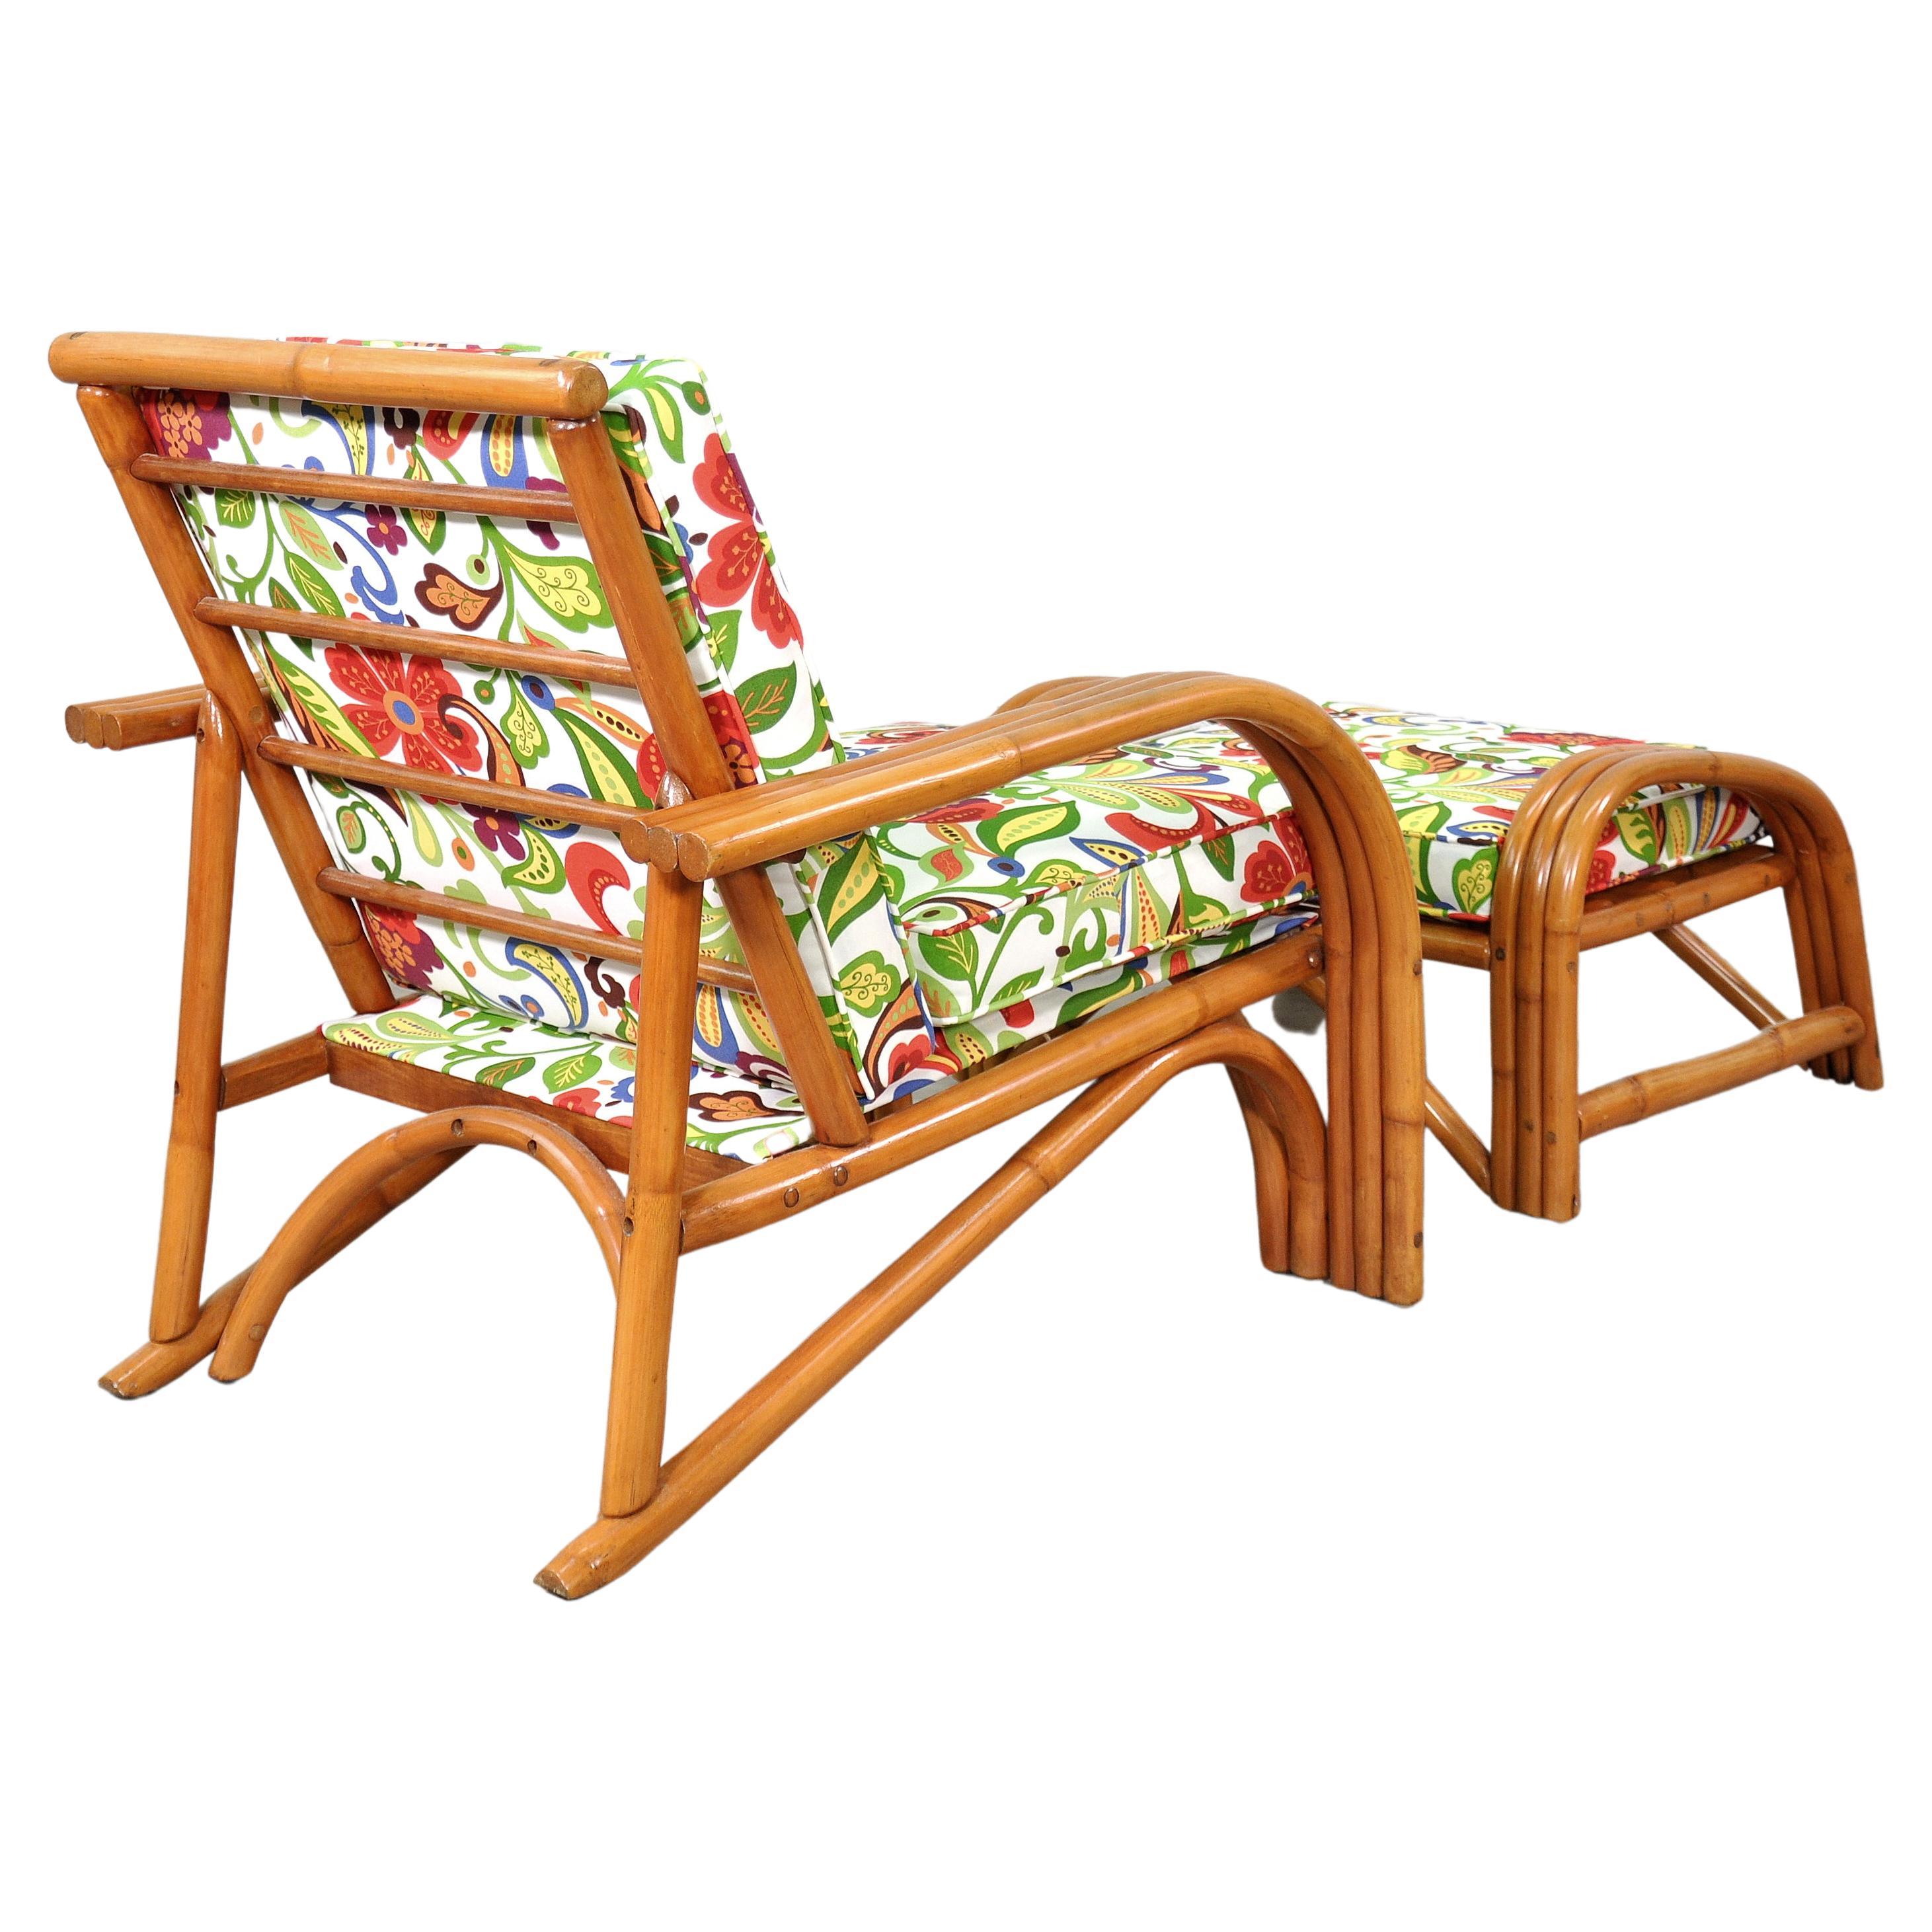 Newly restored and reupholstered vintage three-strand rattan armchair and footstool dating from the late 1940s to early 1950s. The removable cushions have been reupholstered in a Josef Frank style indoor/outdoor performance fabric. The bentwood and